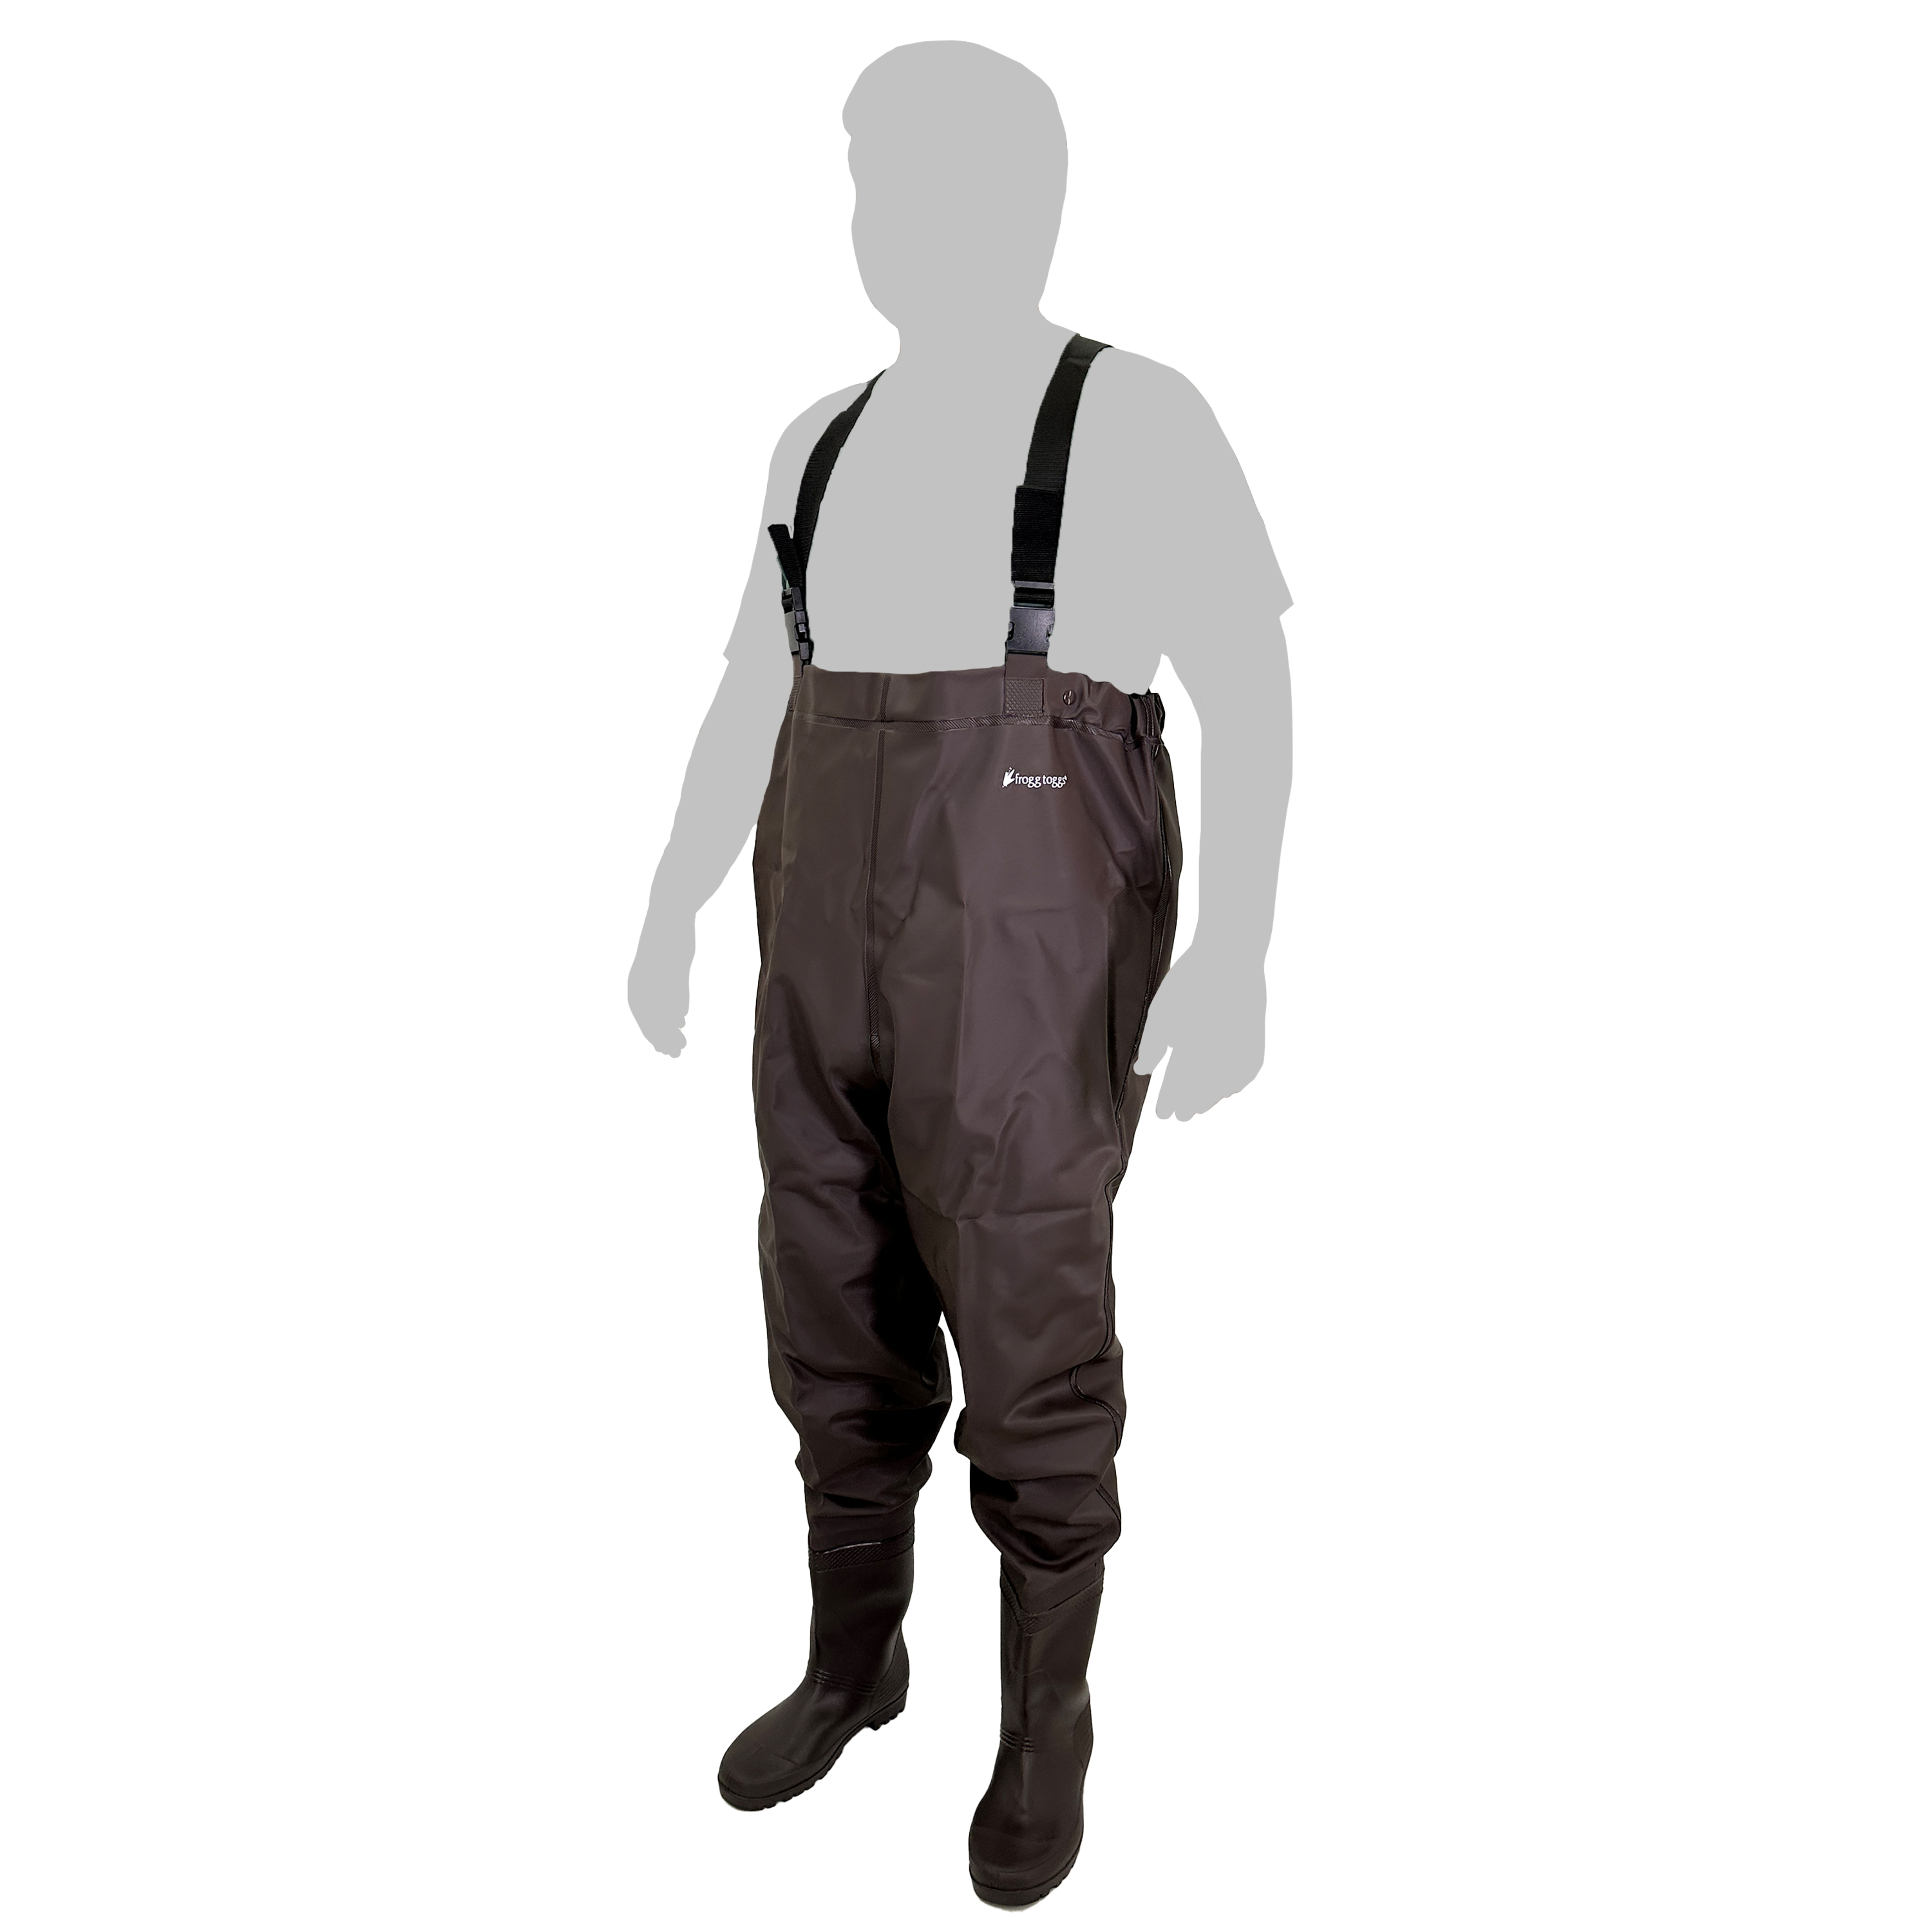 Frogg Toggs® Adjustable H-Back Suspenders